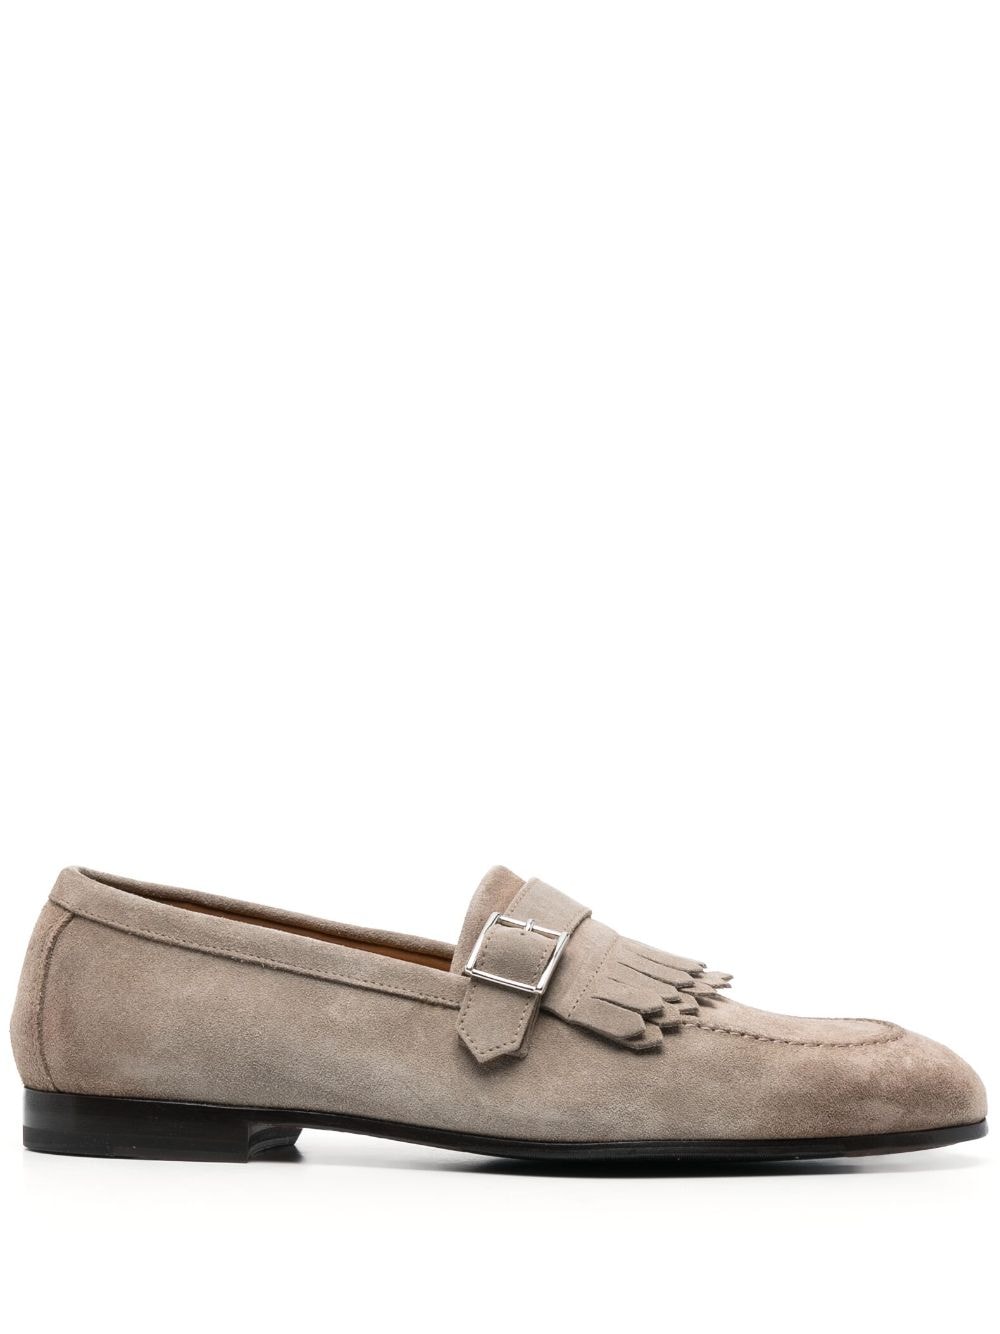 Doucal's fringe-detail suede loafers - Neutrals von Doucal's